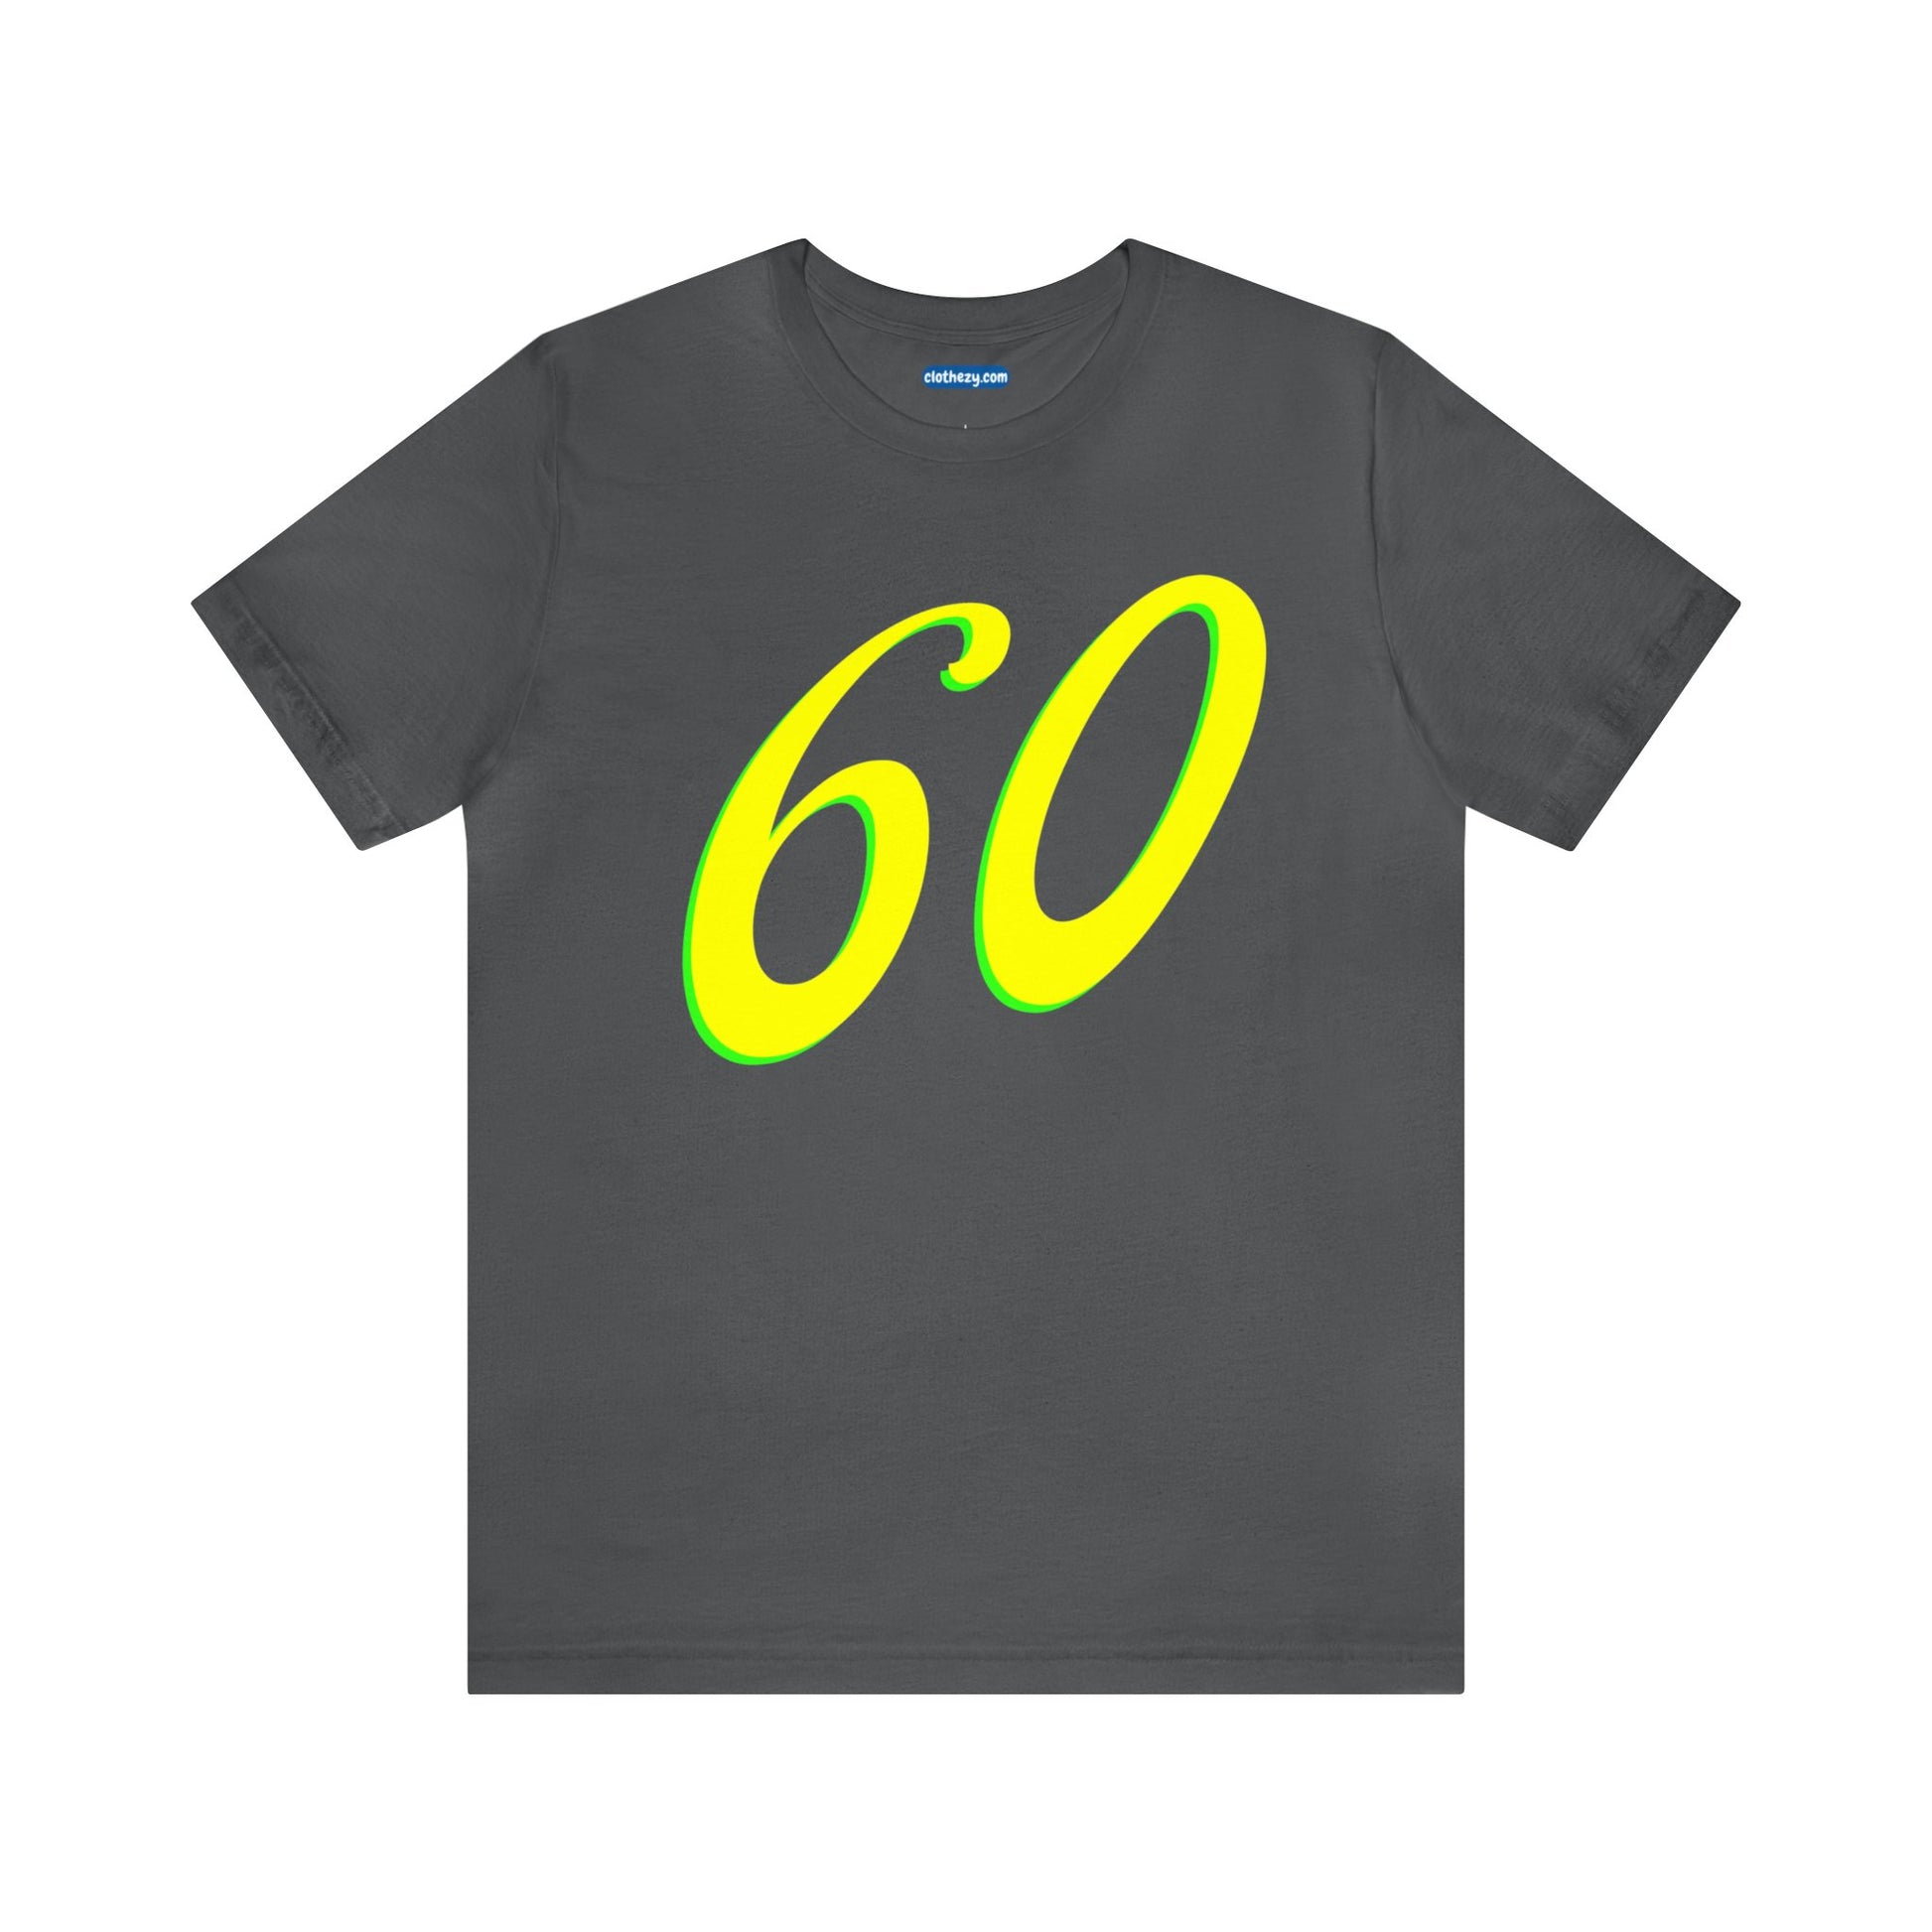 Number 60 Design - Soft Cotton Tee for birthdays and celebrations, Gift for friends and family, Multiple Options by clothezy.com in Black Size Small - Buy Now